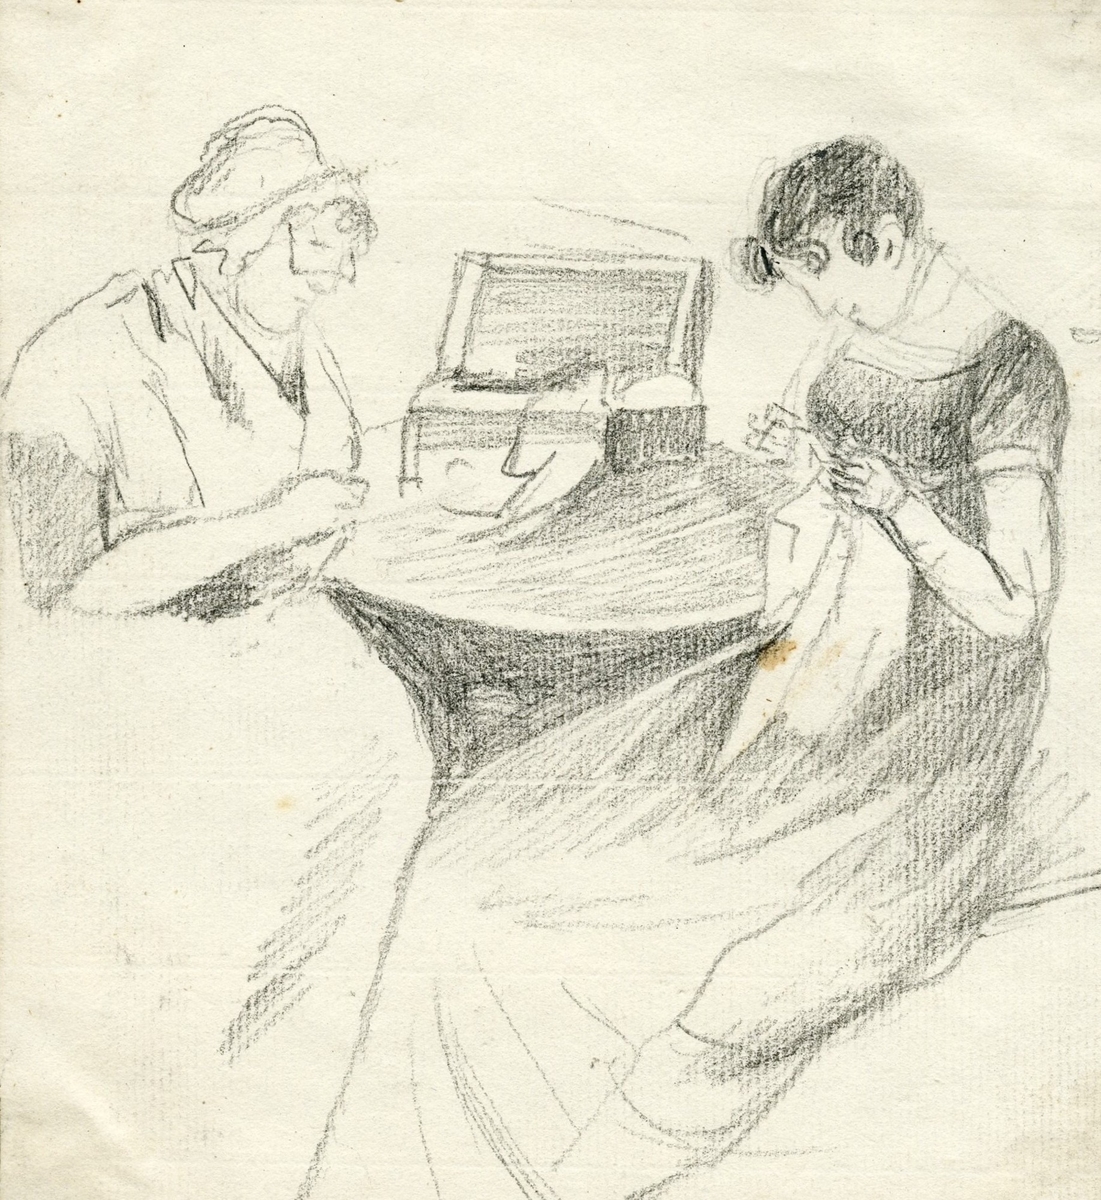 Two Women Sewing